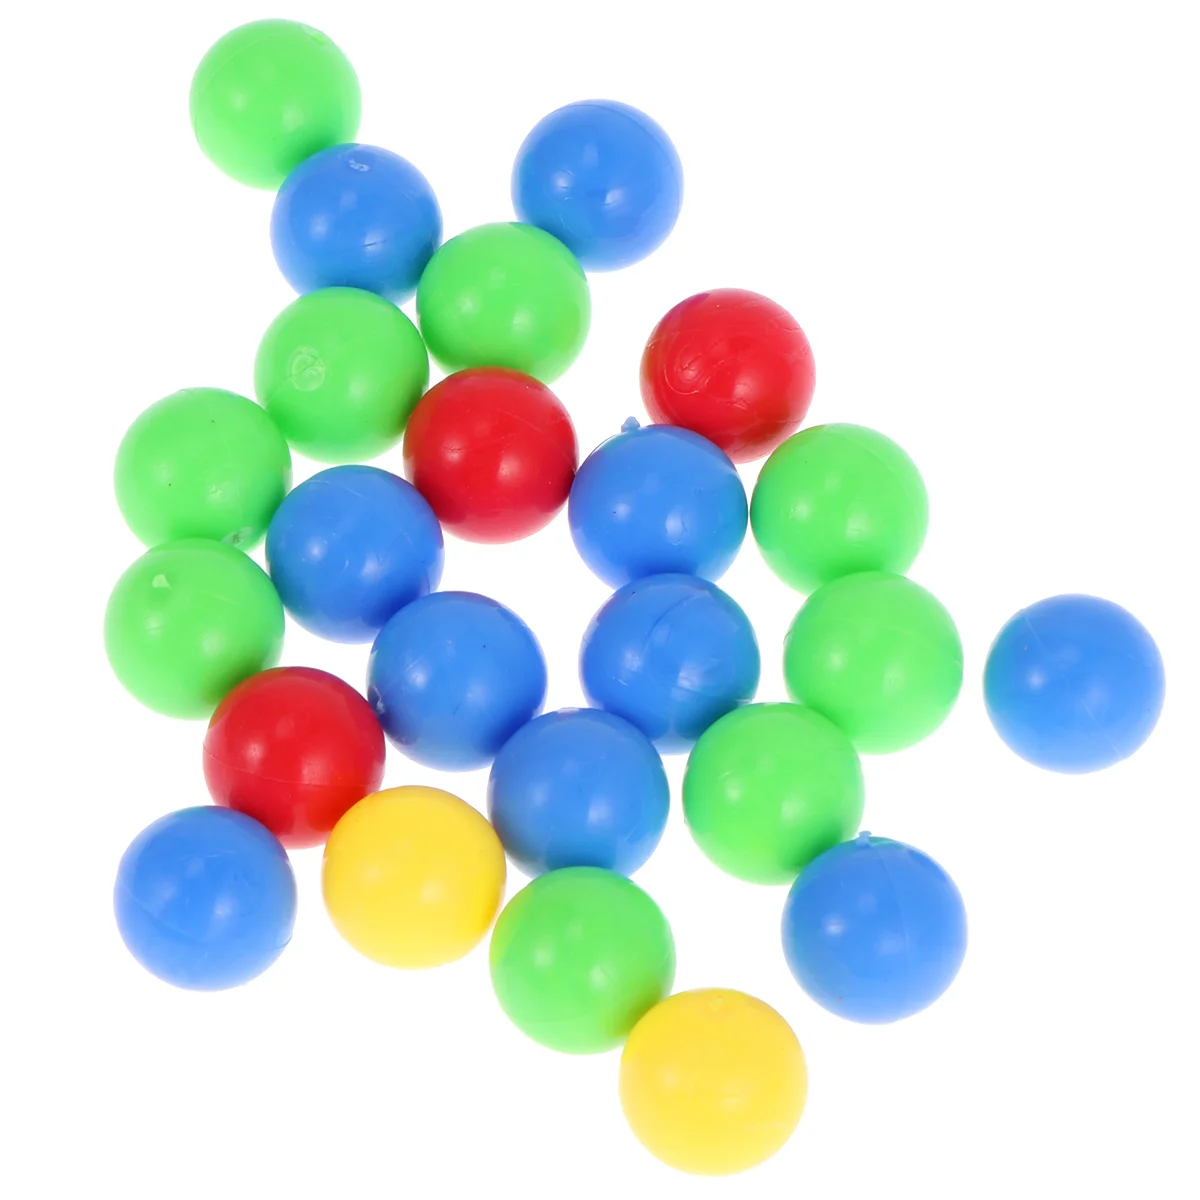 

Game Replacement Balls Plastic Colorful Games Beads Compatible for Hungry Hippos Swallowing Beads Game Toy (Random Color)